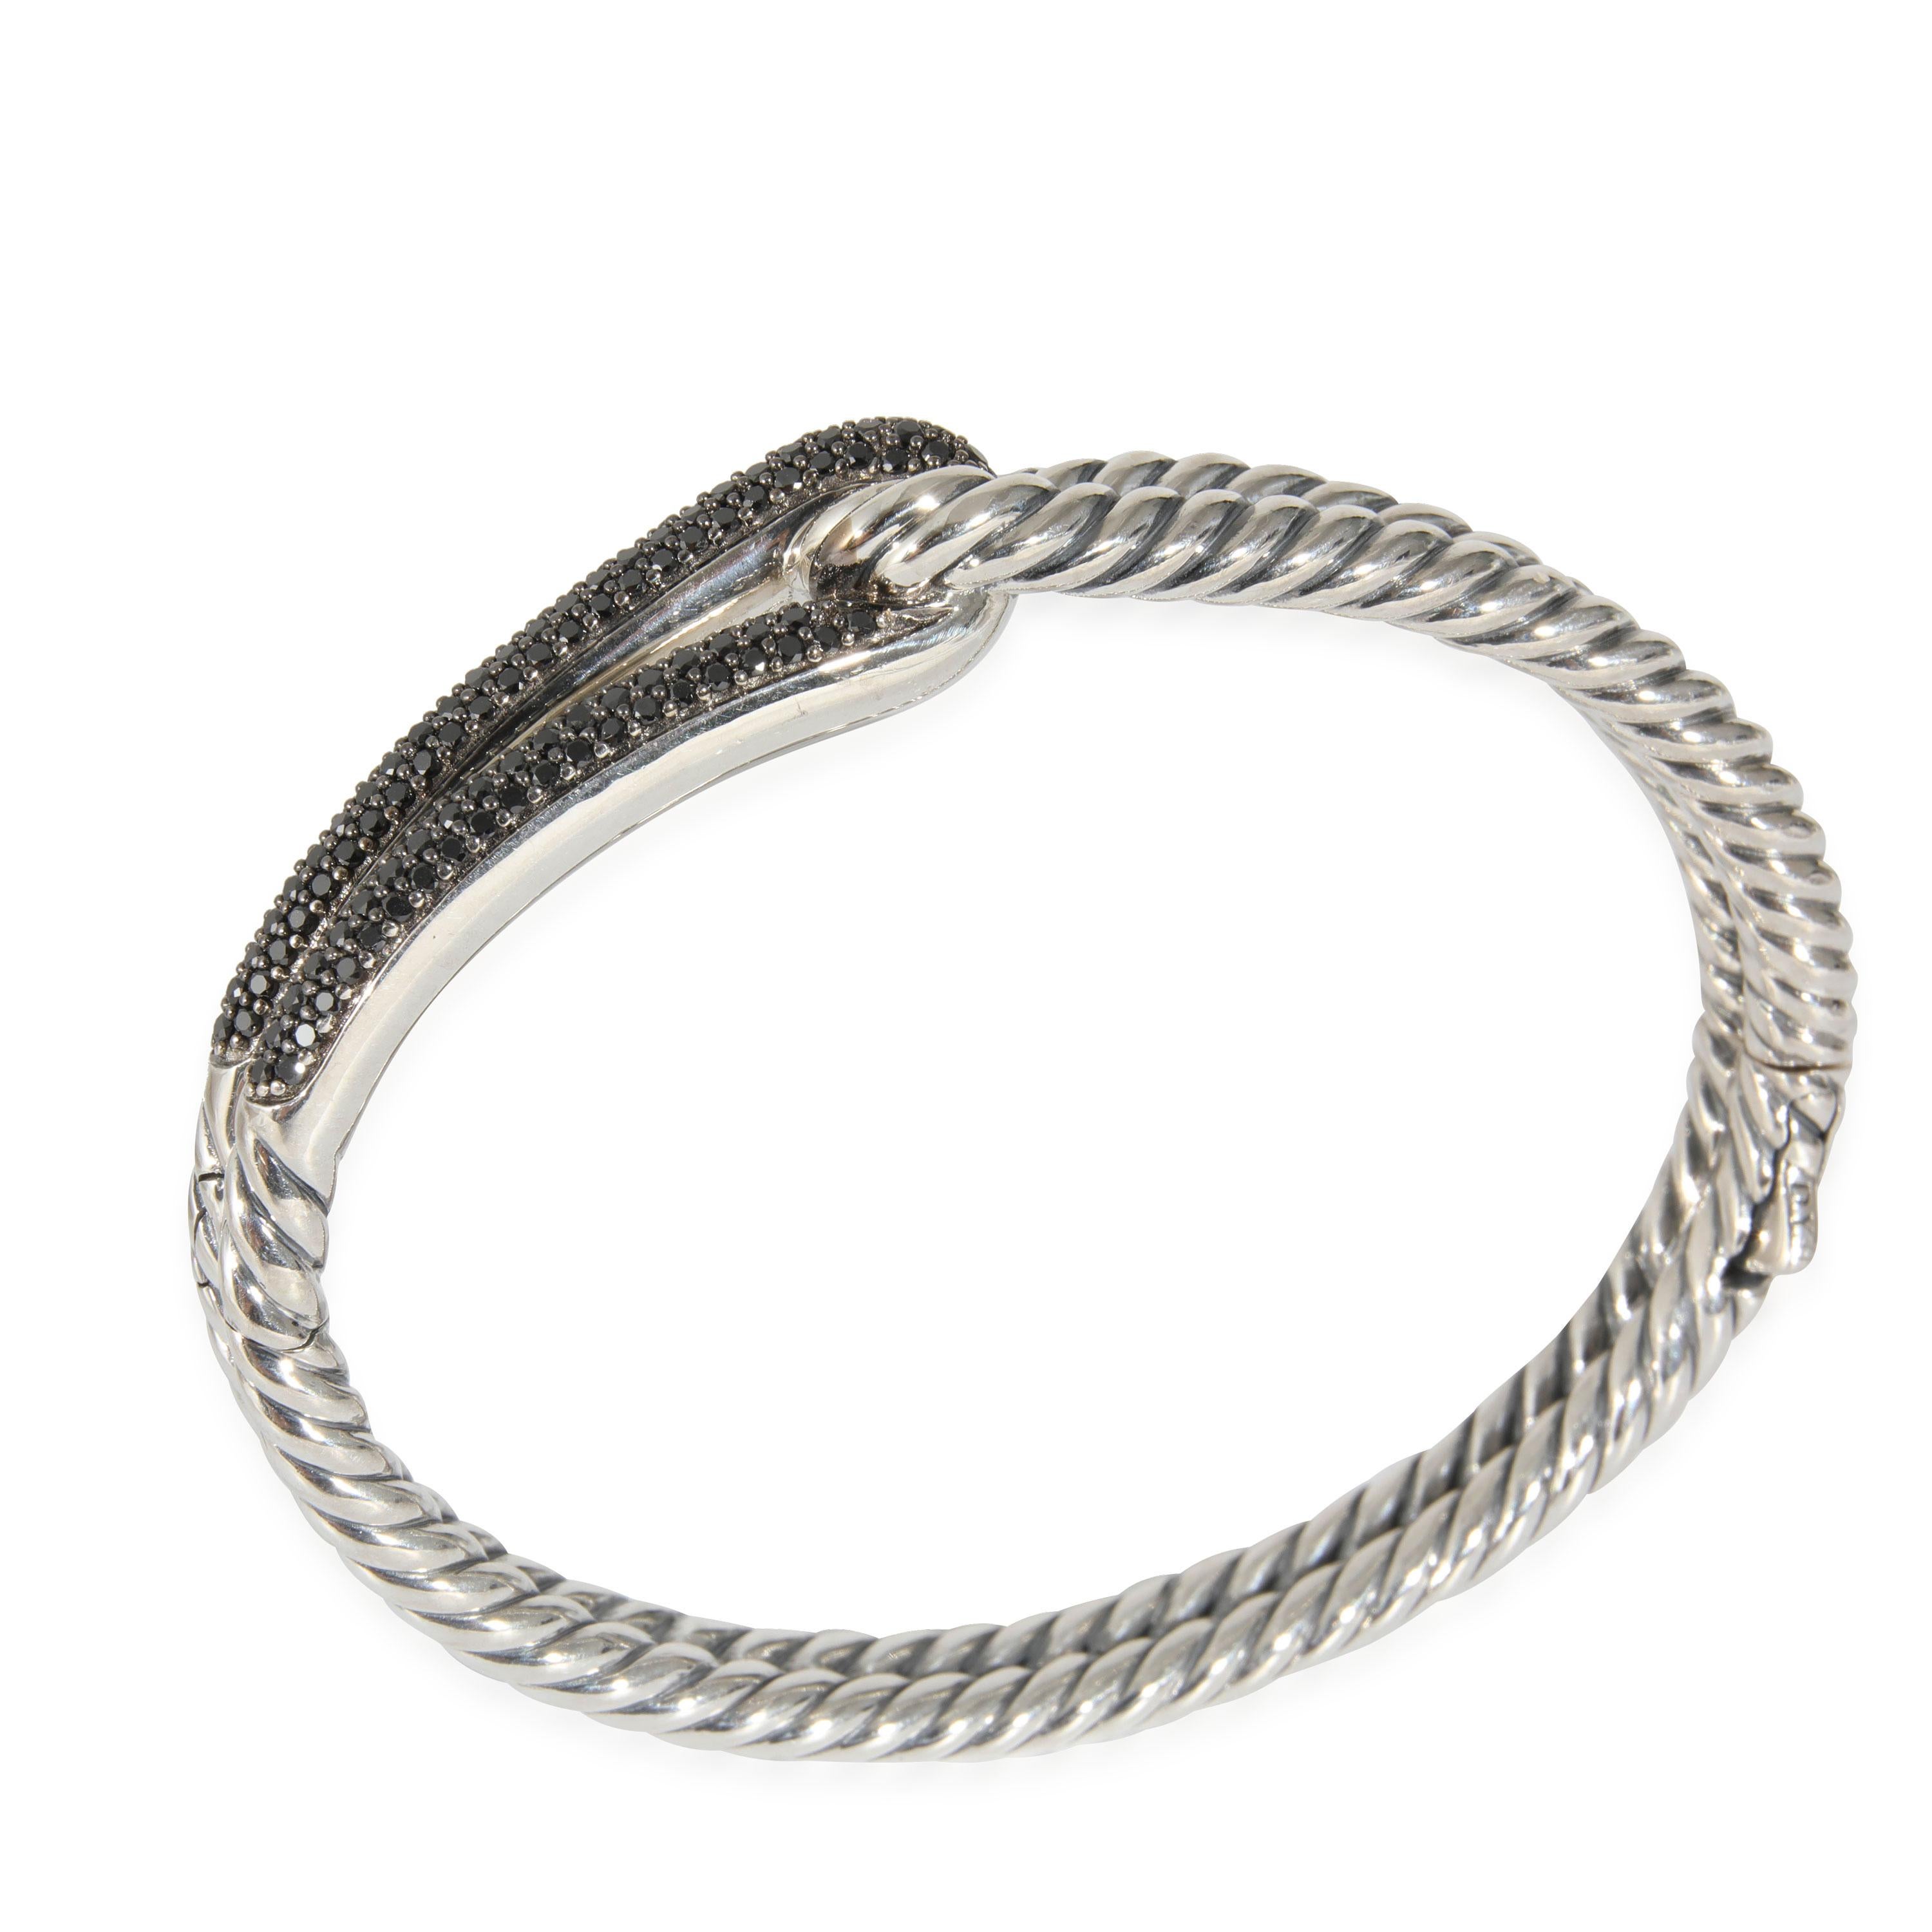 David Yurman Labyrinth Bracelet in  Sterling Silver 0.84 CTW,  X Small

PRIMARY DETAILS
SKU: 130956
Listing Title: David Yurman Labyrinth Bracelet in  Sterling Silver 0.84 CTW,  X Small
Condition Description: David Yurman explores the complexity of